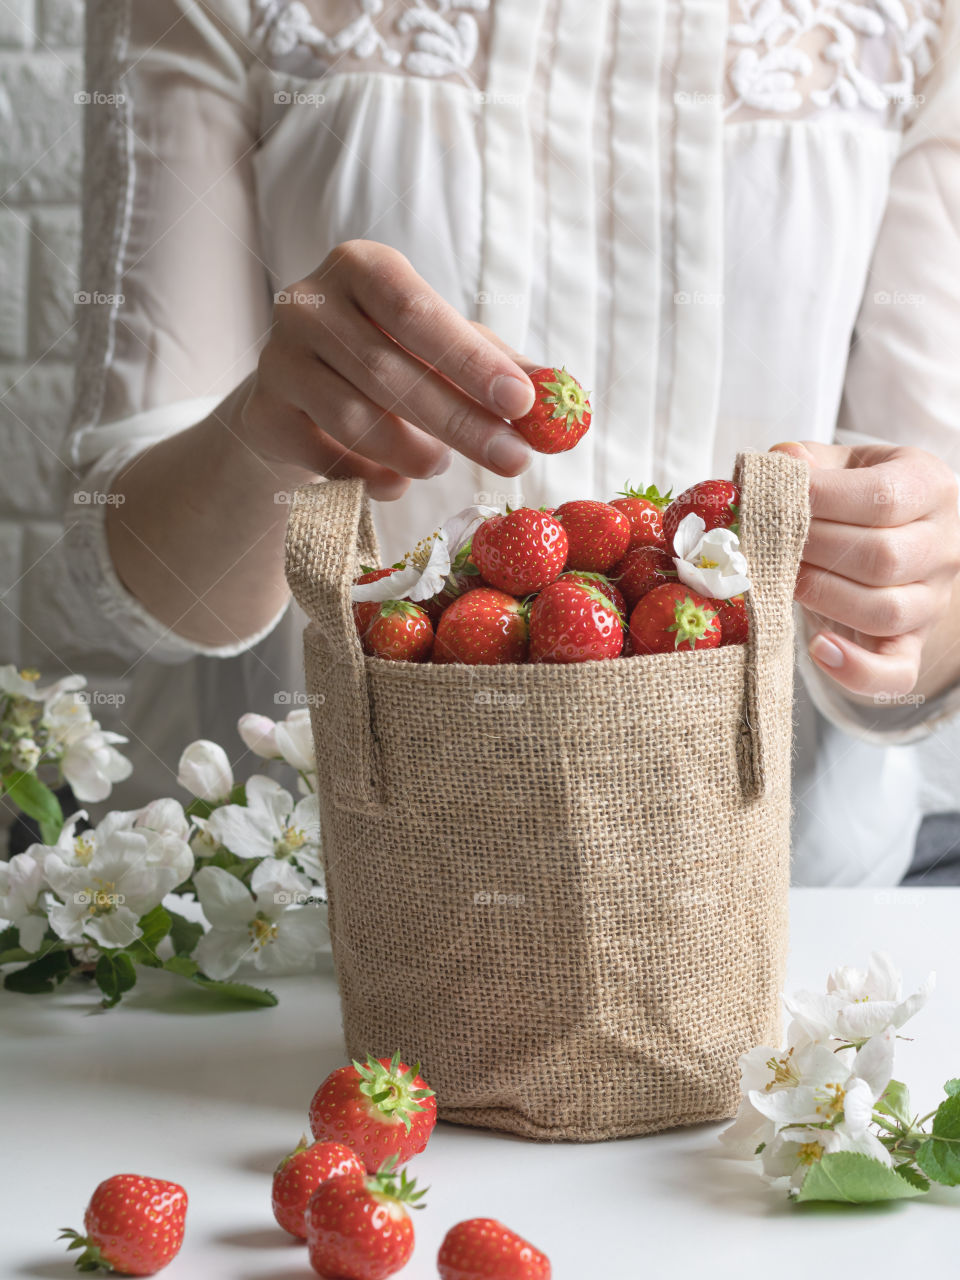 Putting strawberry in a jute bag full of strawberries 